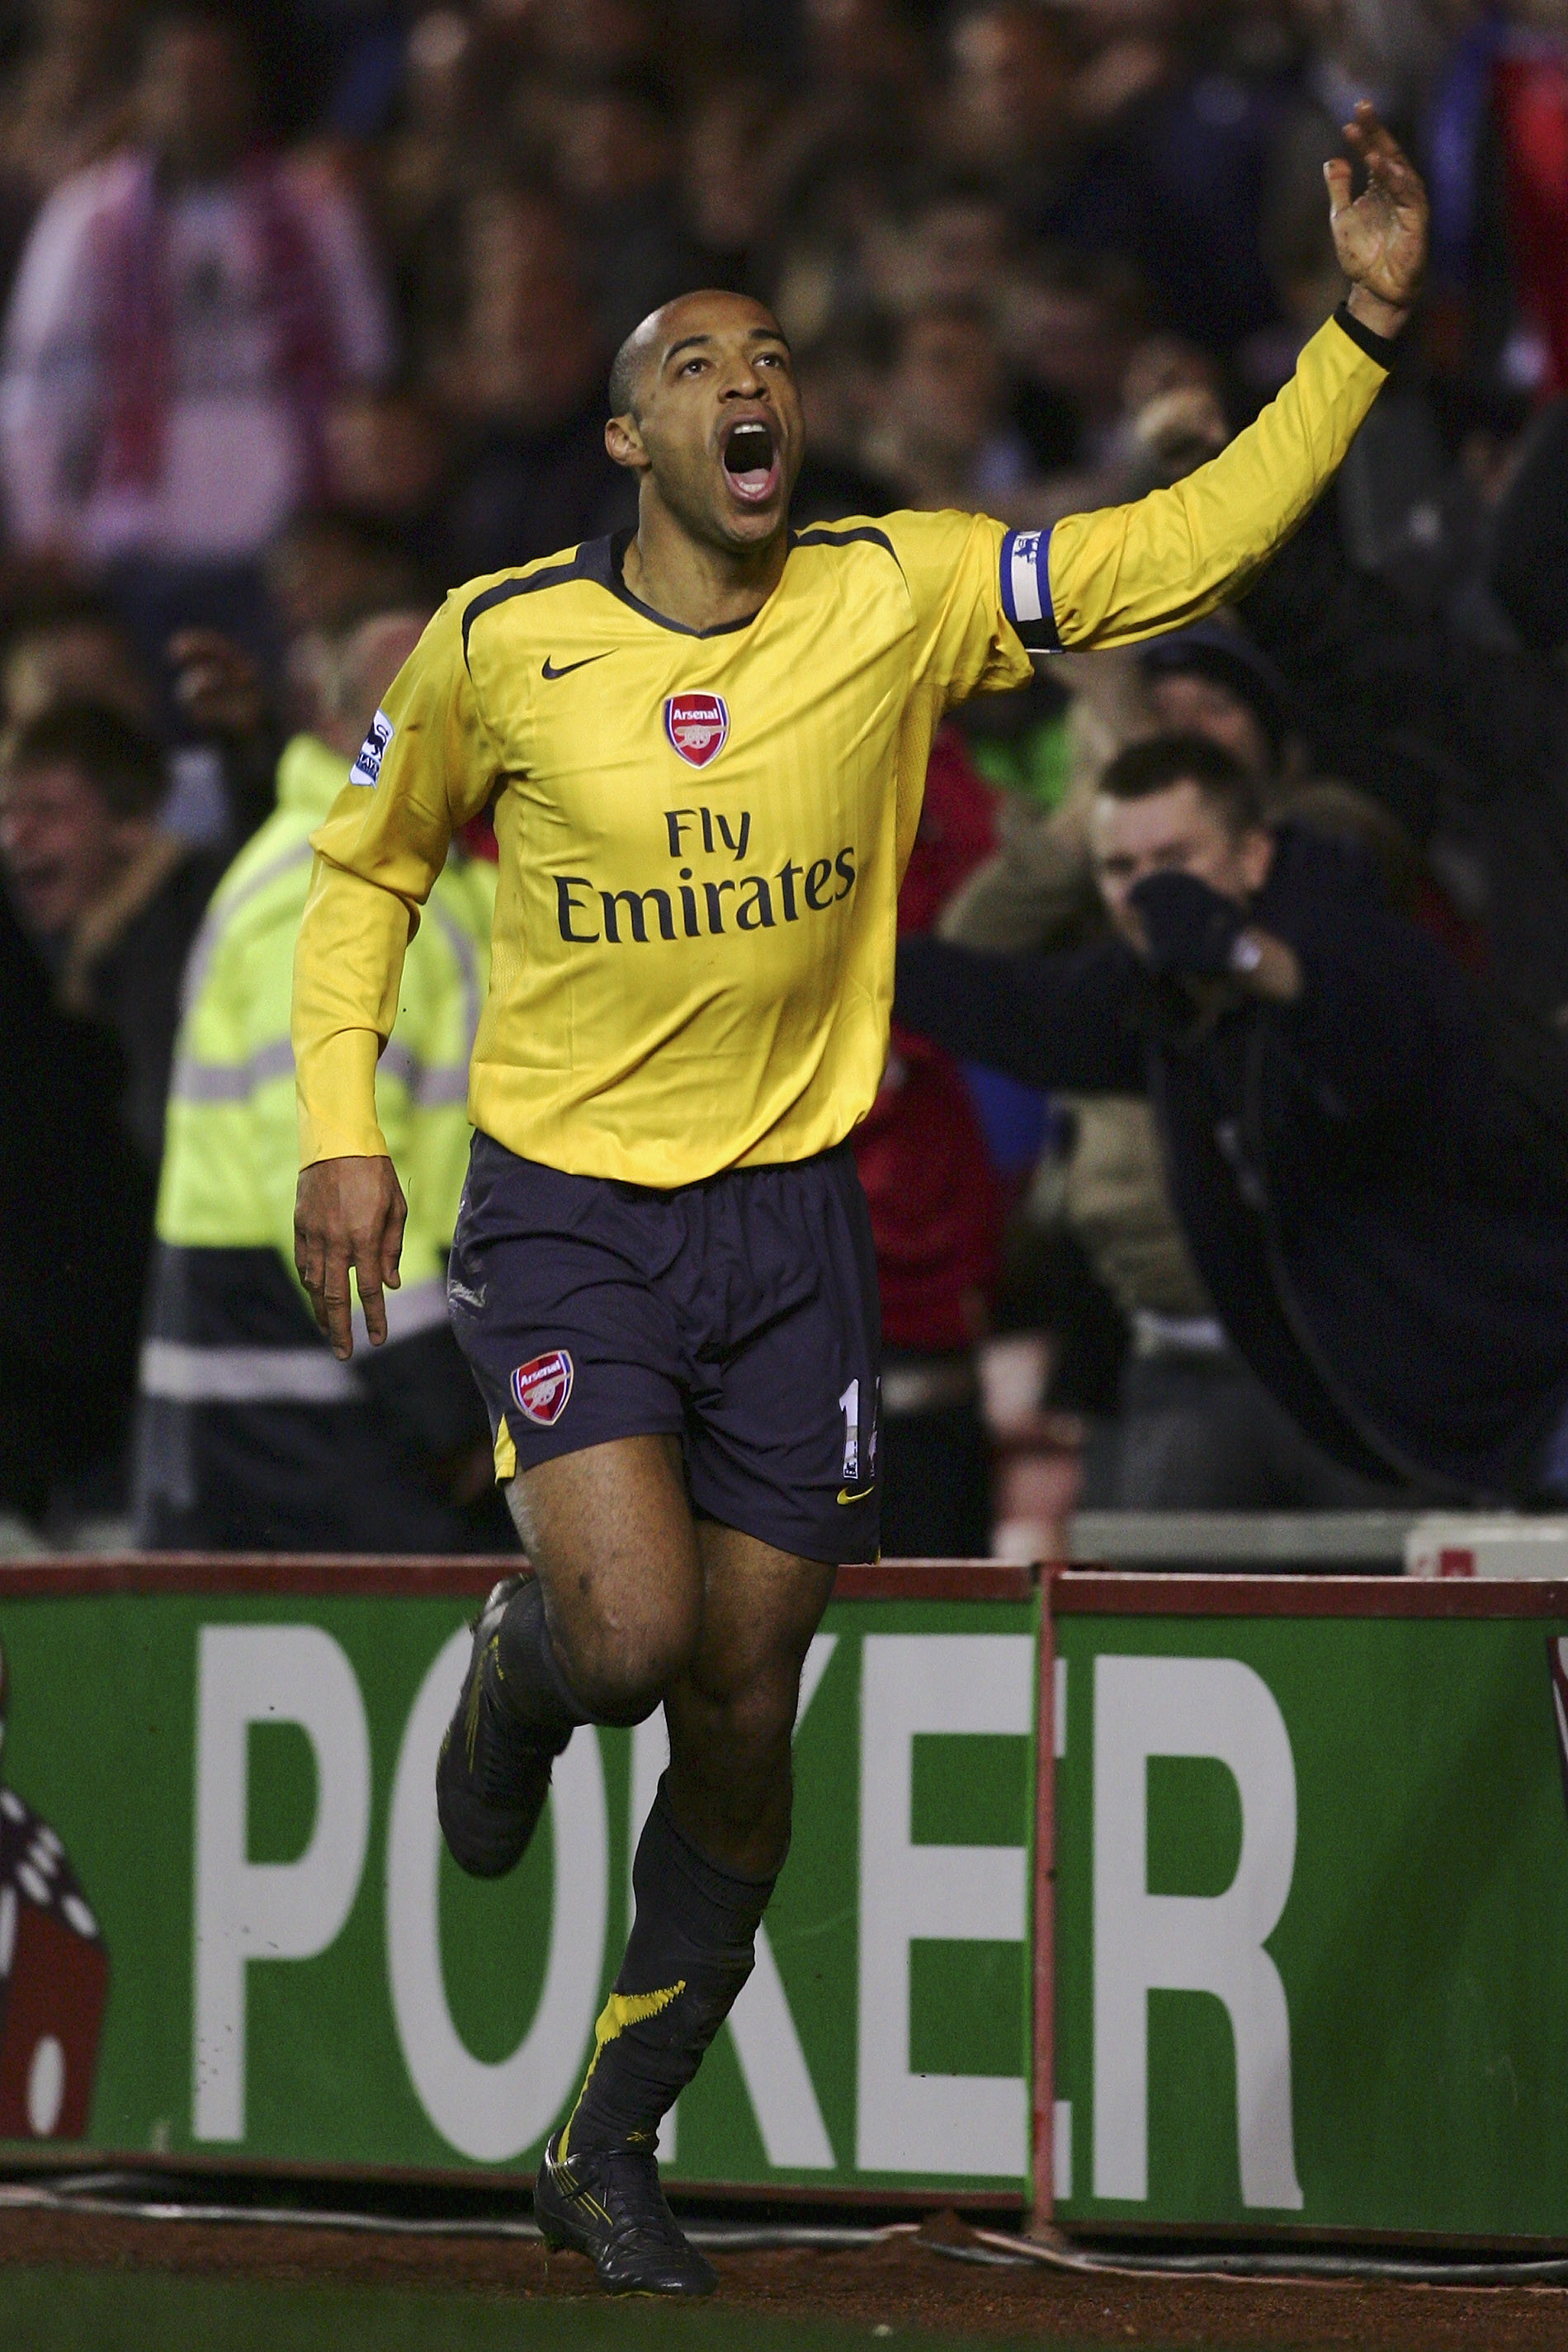 MIDDLESBROUGH, UNITED KINGDOM - FEBRUARY 03:  Thierry Henry of Arsenal celebrates scoring his team's first goal during the Barclays Premiership match between Middlesbrough and Arsenal at the Riverside Stadium on February 3, 2007 in Middlesbrough, England.